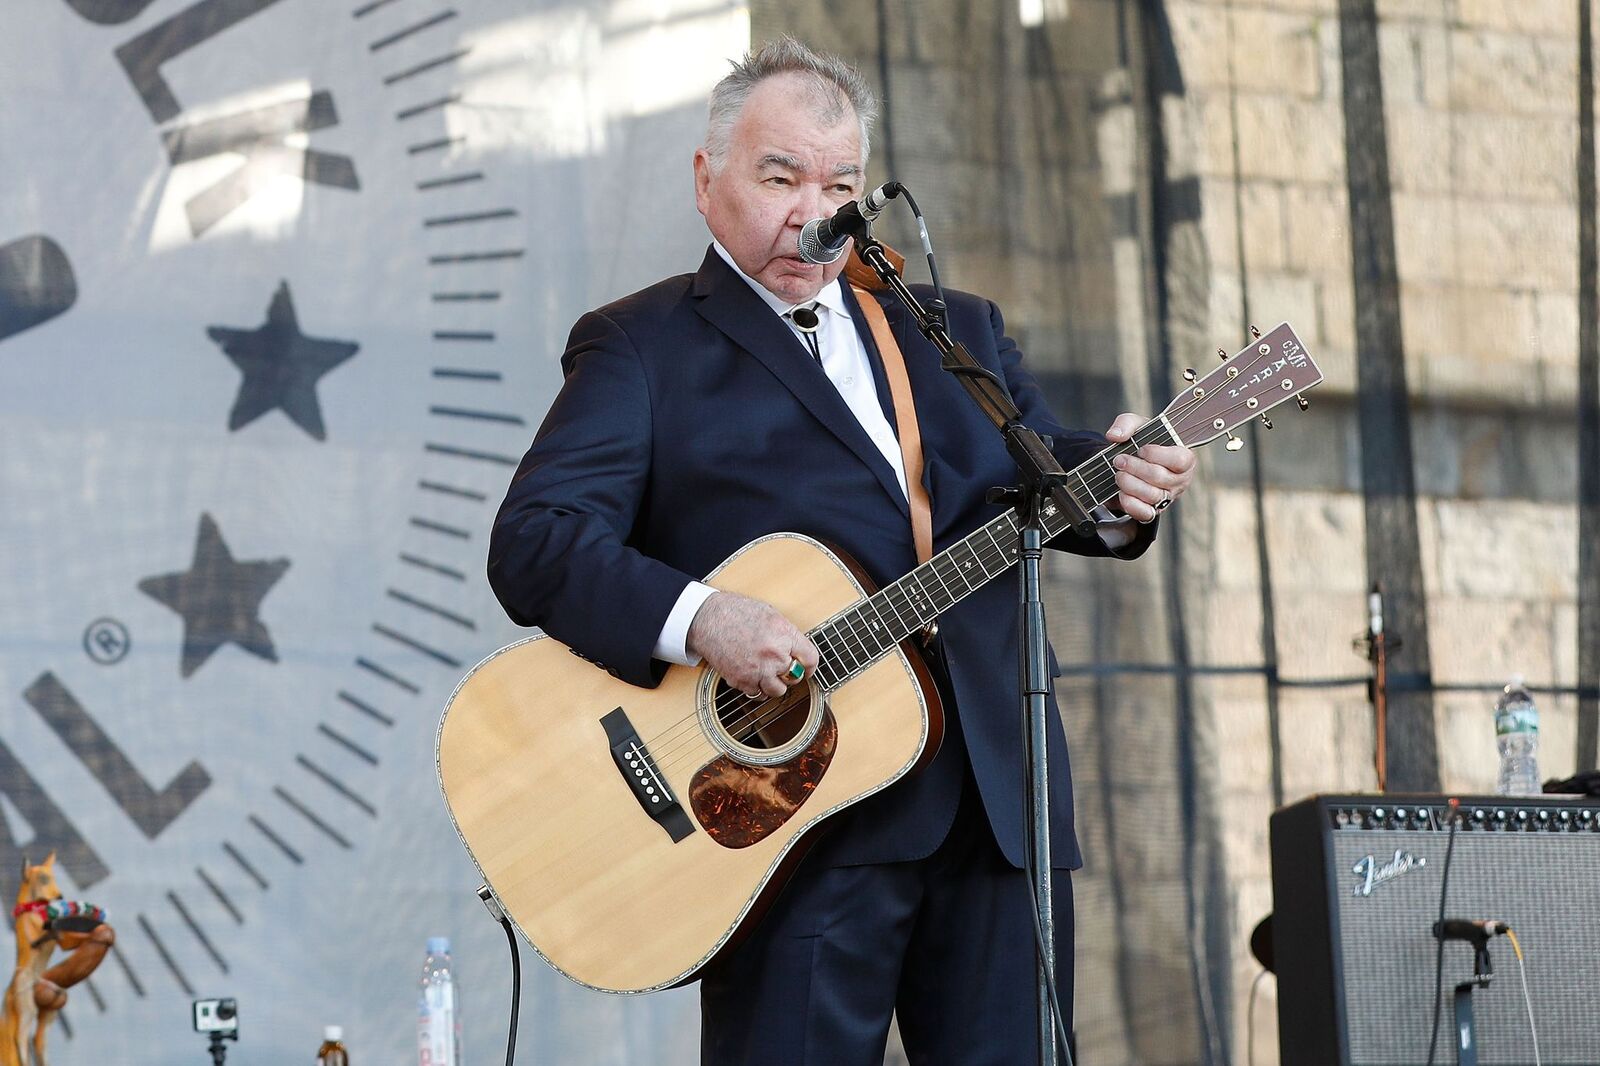 John Prine performs during the Newport Folk Festival at Fort Adams State Park on July 30, 2017, in Newport, Rhode Island | Photo: Taylor Hill/WireImage/Getty Images